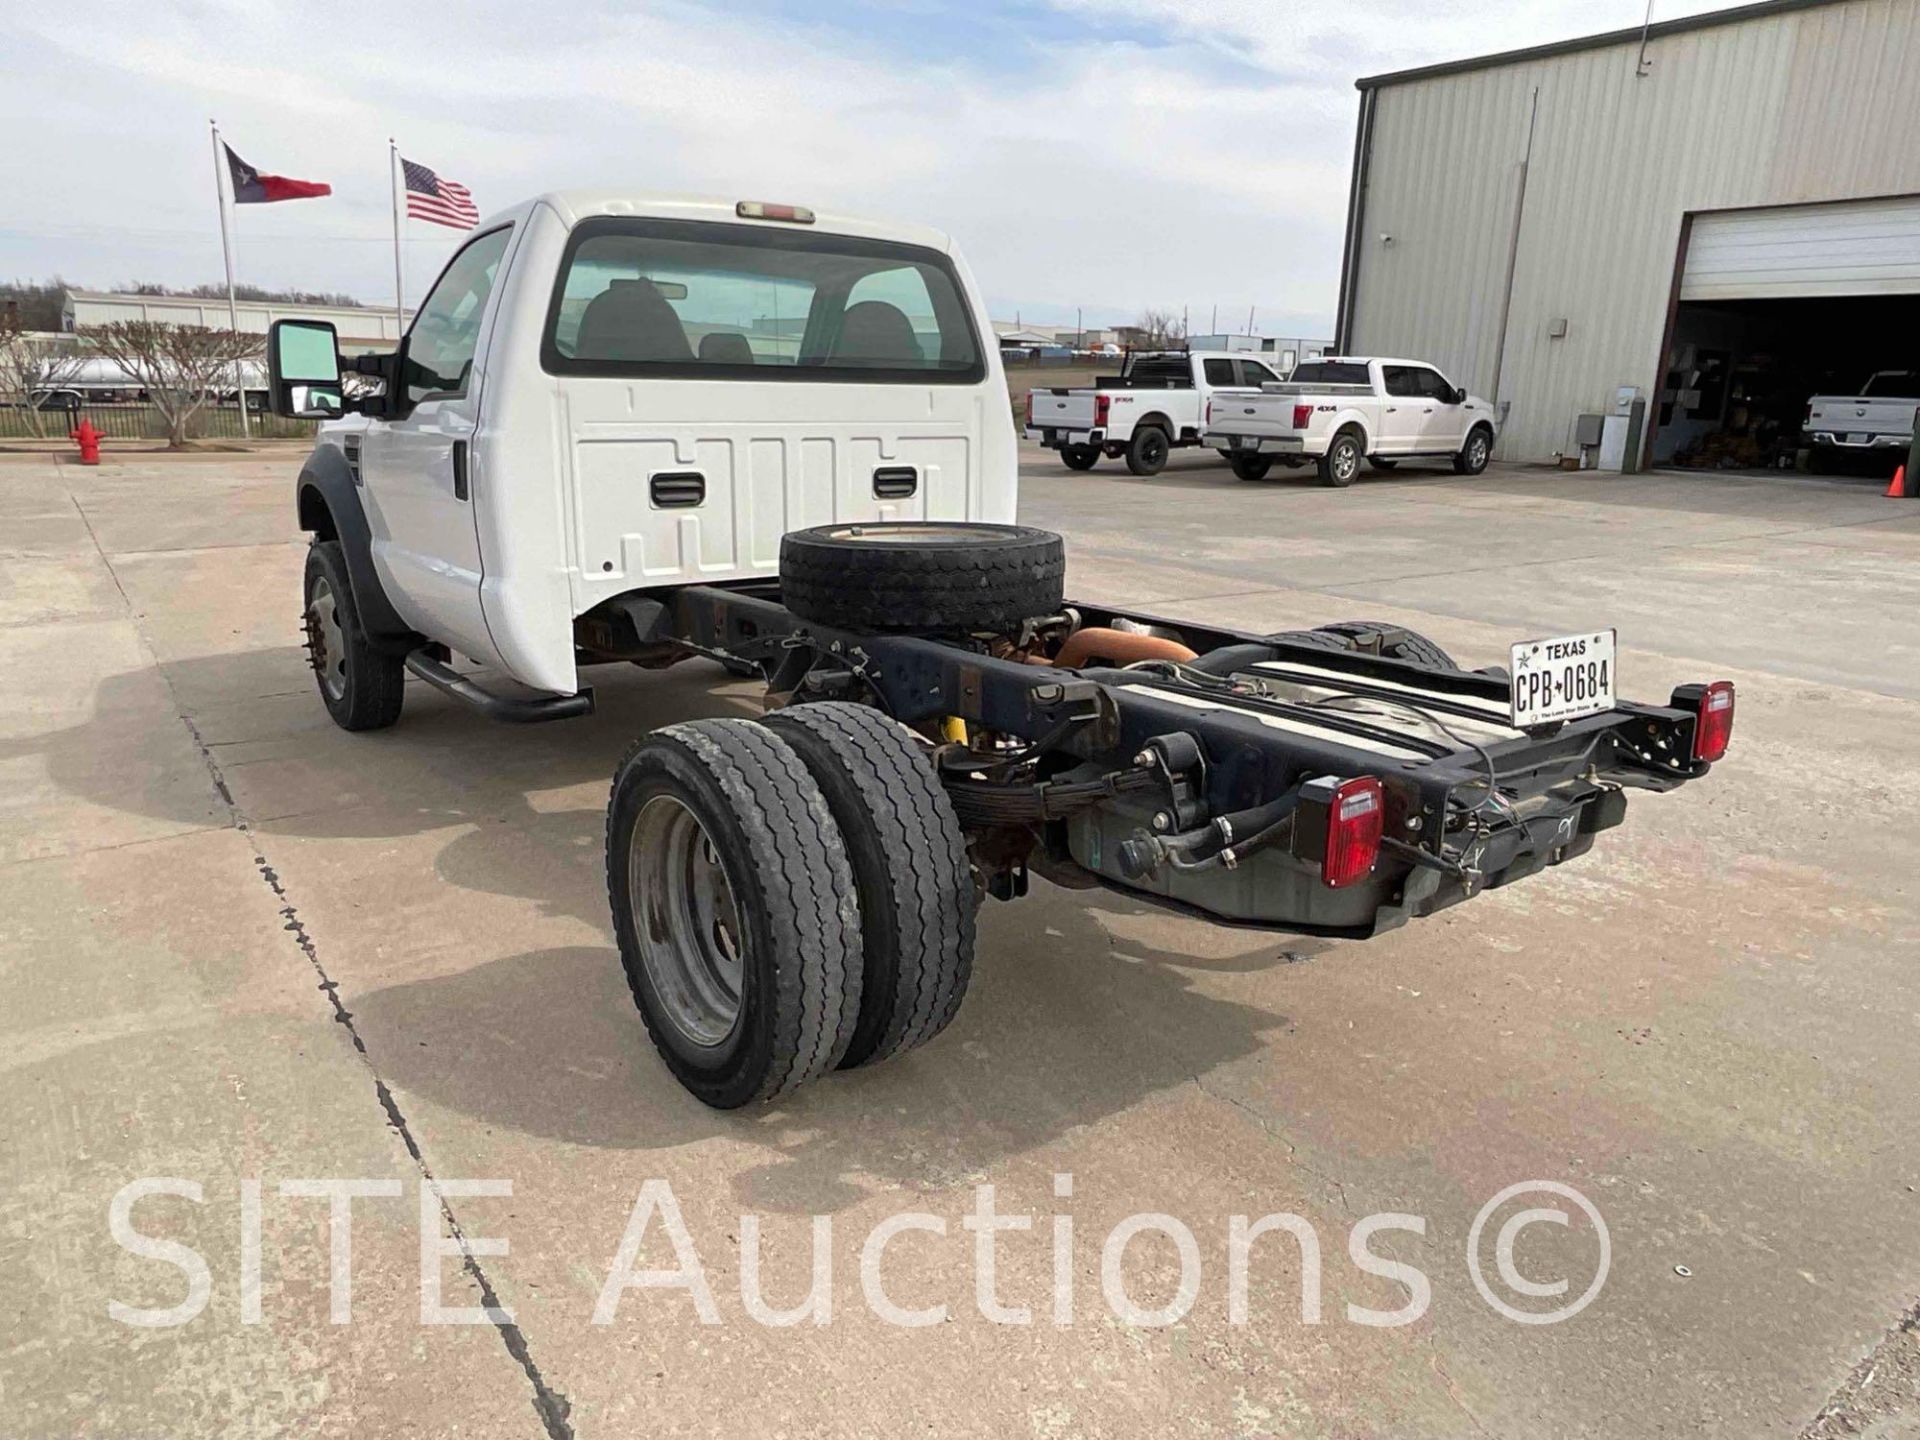 2010 Ford F450 SD Cab & Chassis Truck - Image 7 of 20